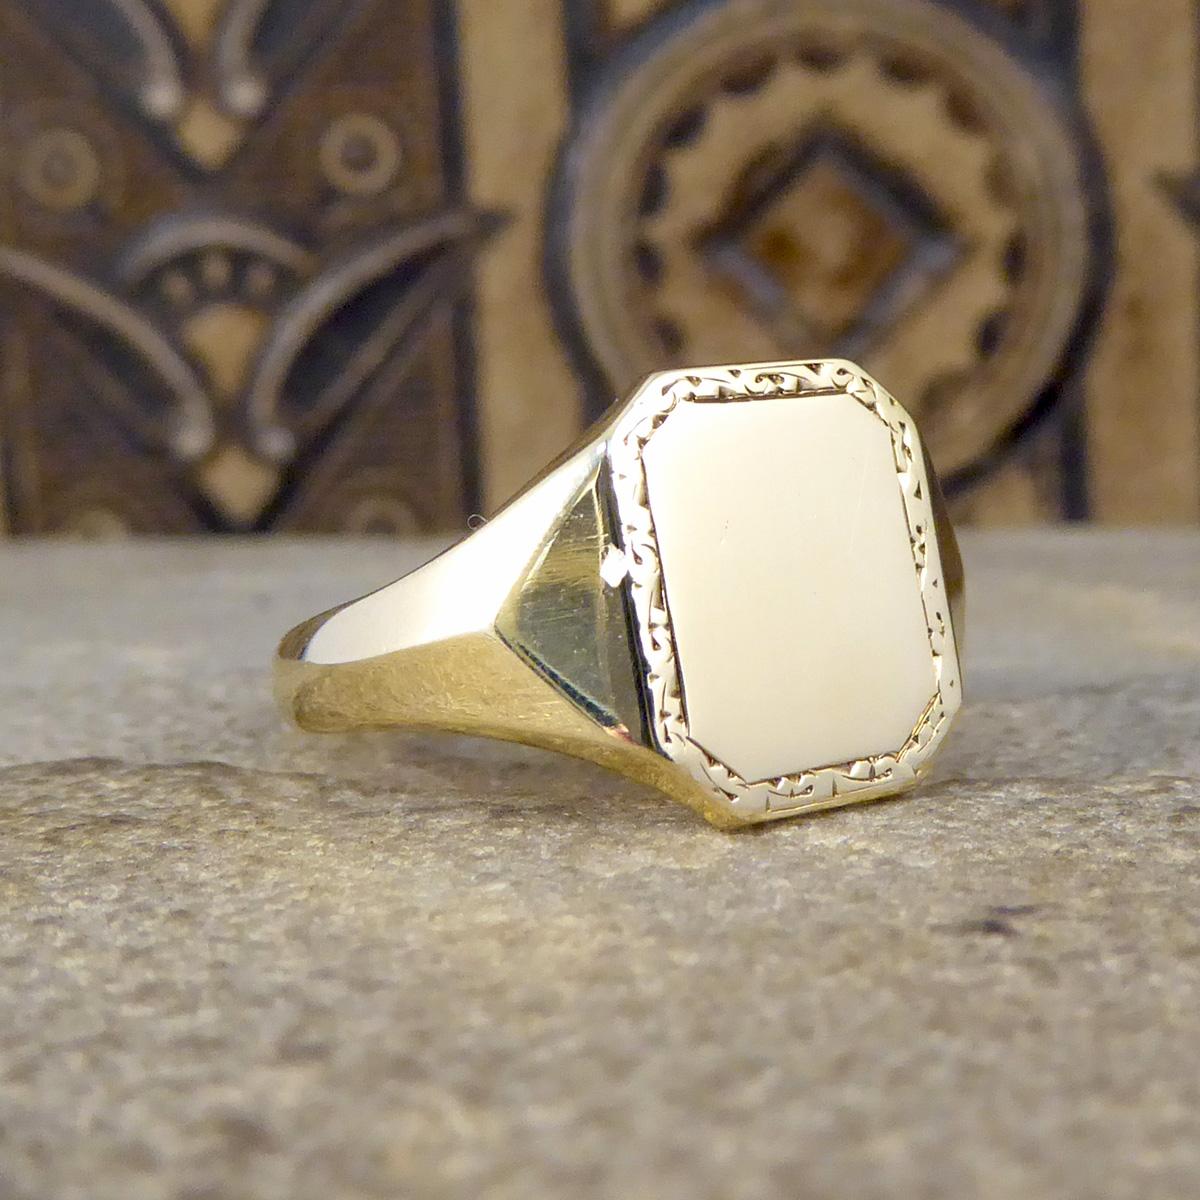 Traditionally signet rings were worn by a gentlemen of importance on the pinky finger, and now worn by men and women alike as such a well loved and sought after piece of jewellery. This signet ring is fully crafted from 9ct Yellow Gold with full